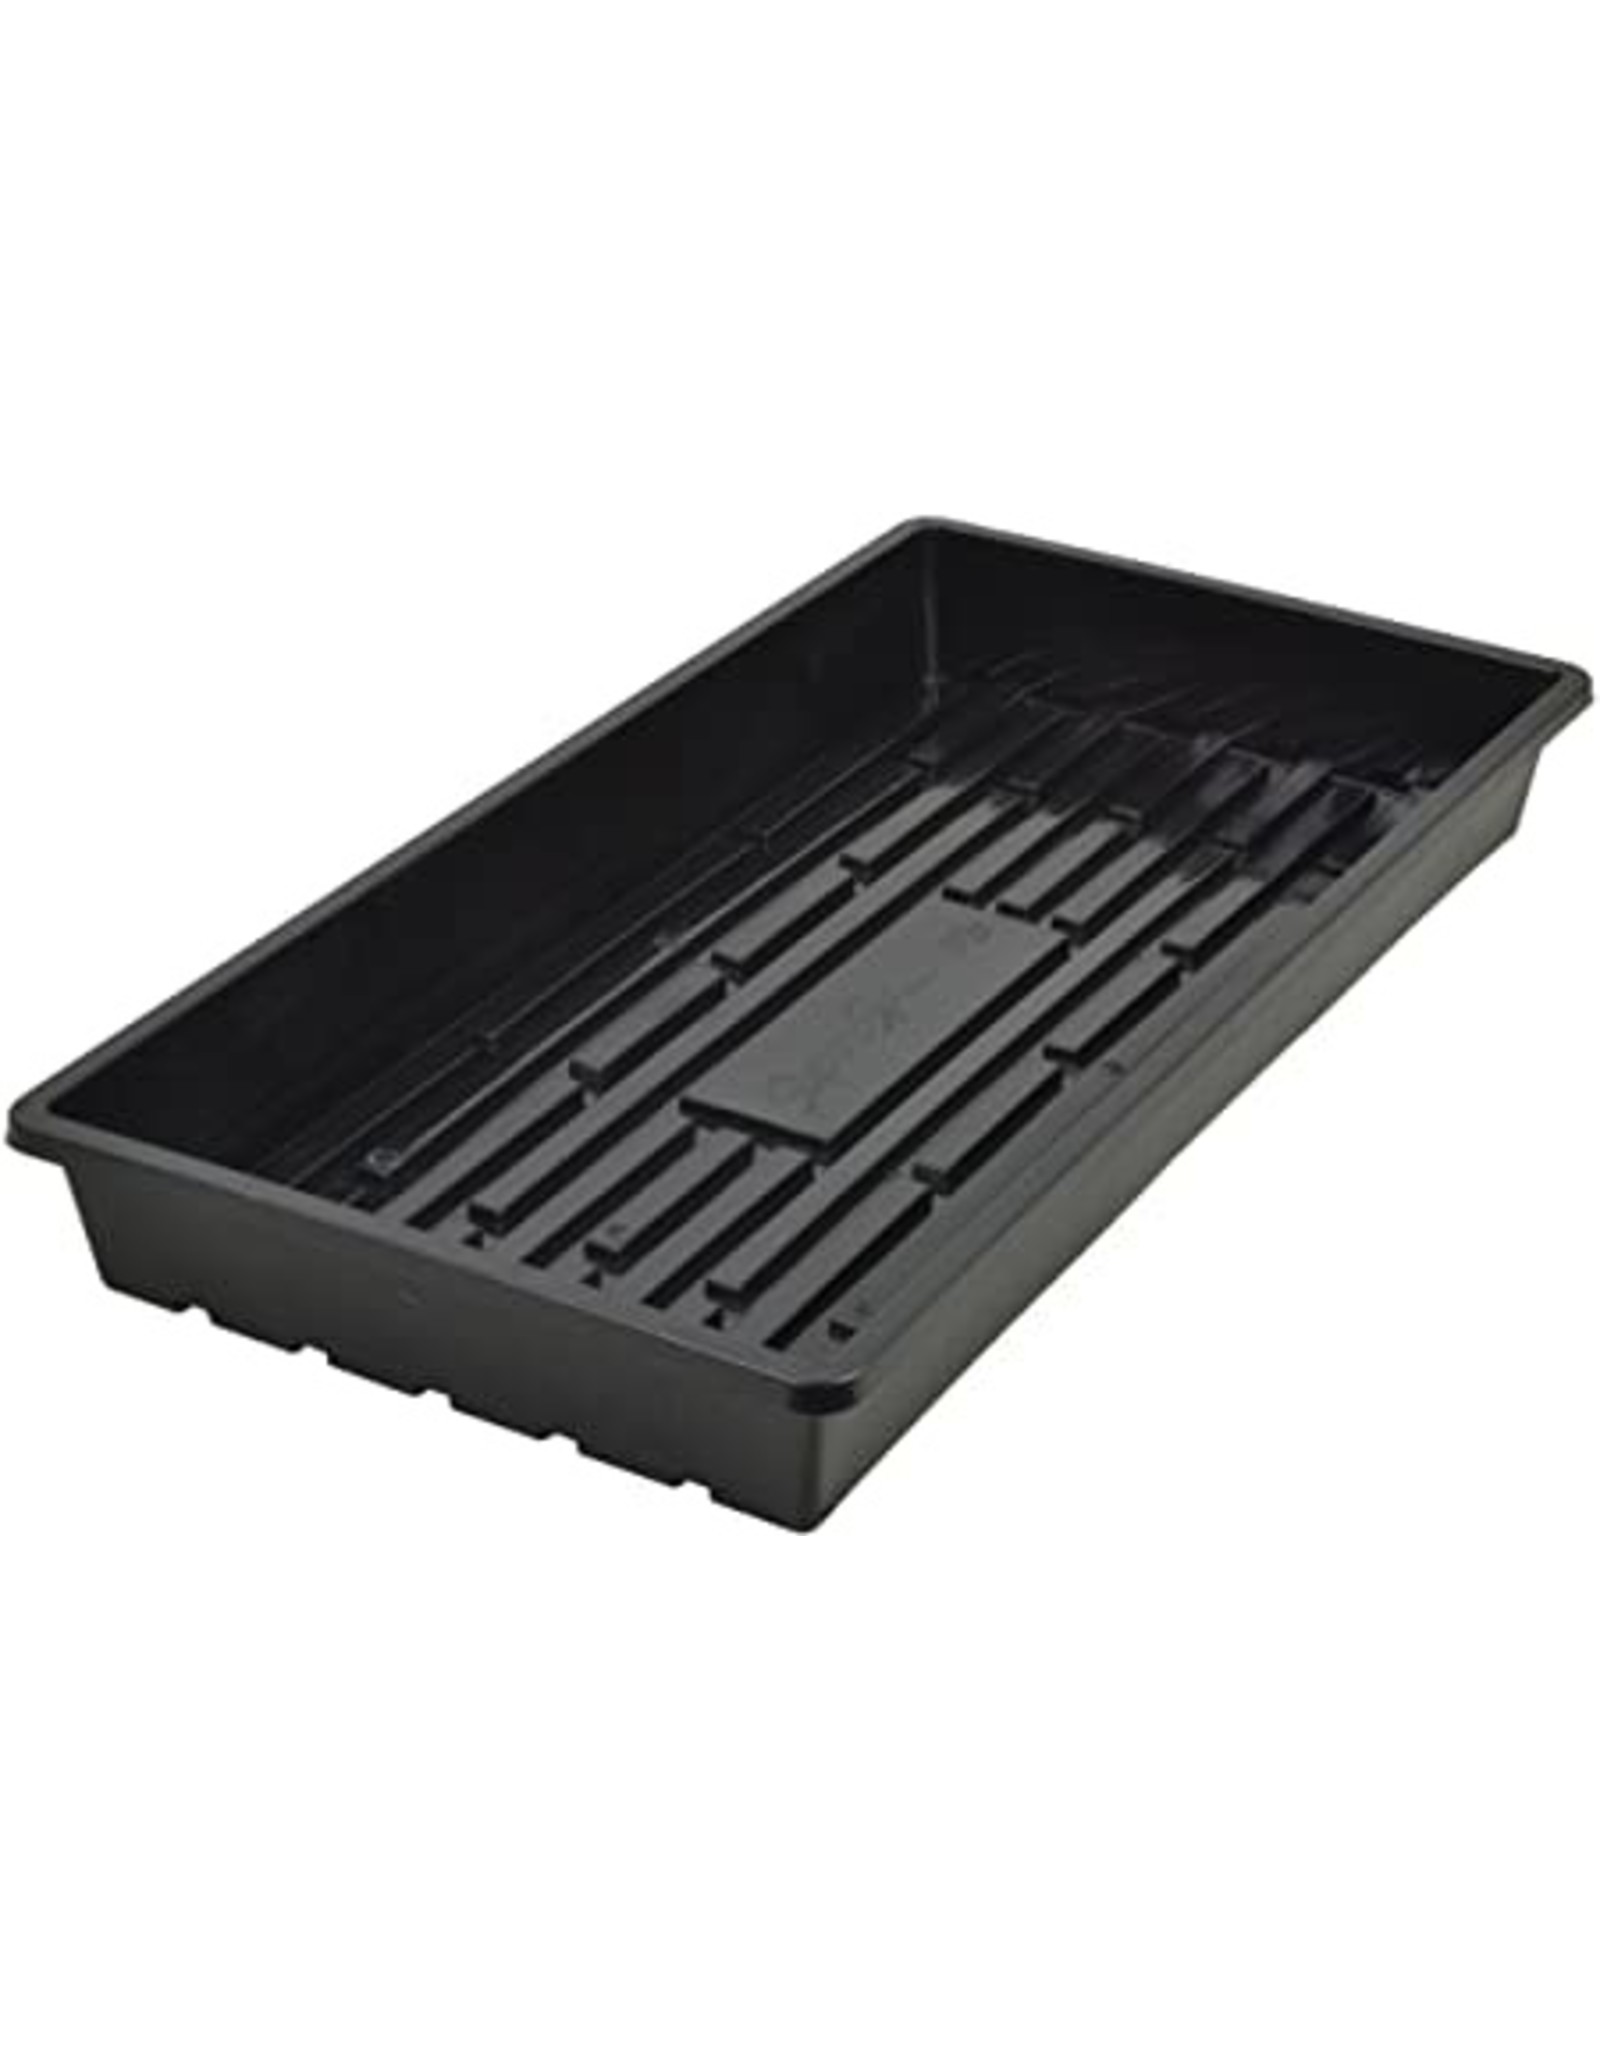 Super Sprouter Super Sprouter Quad Thick 10 x 20 Tray - No Hole